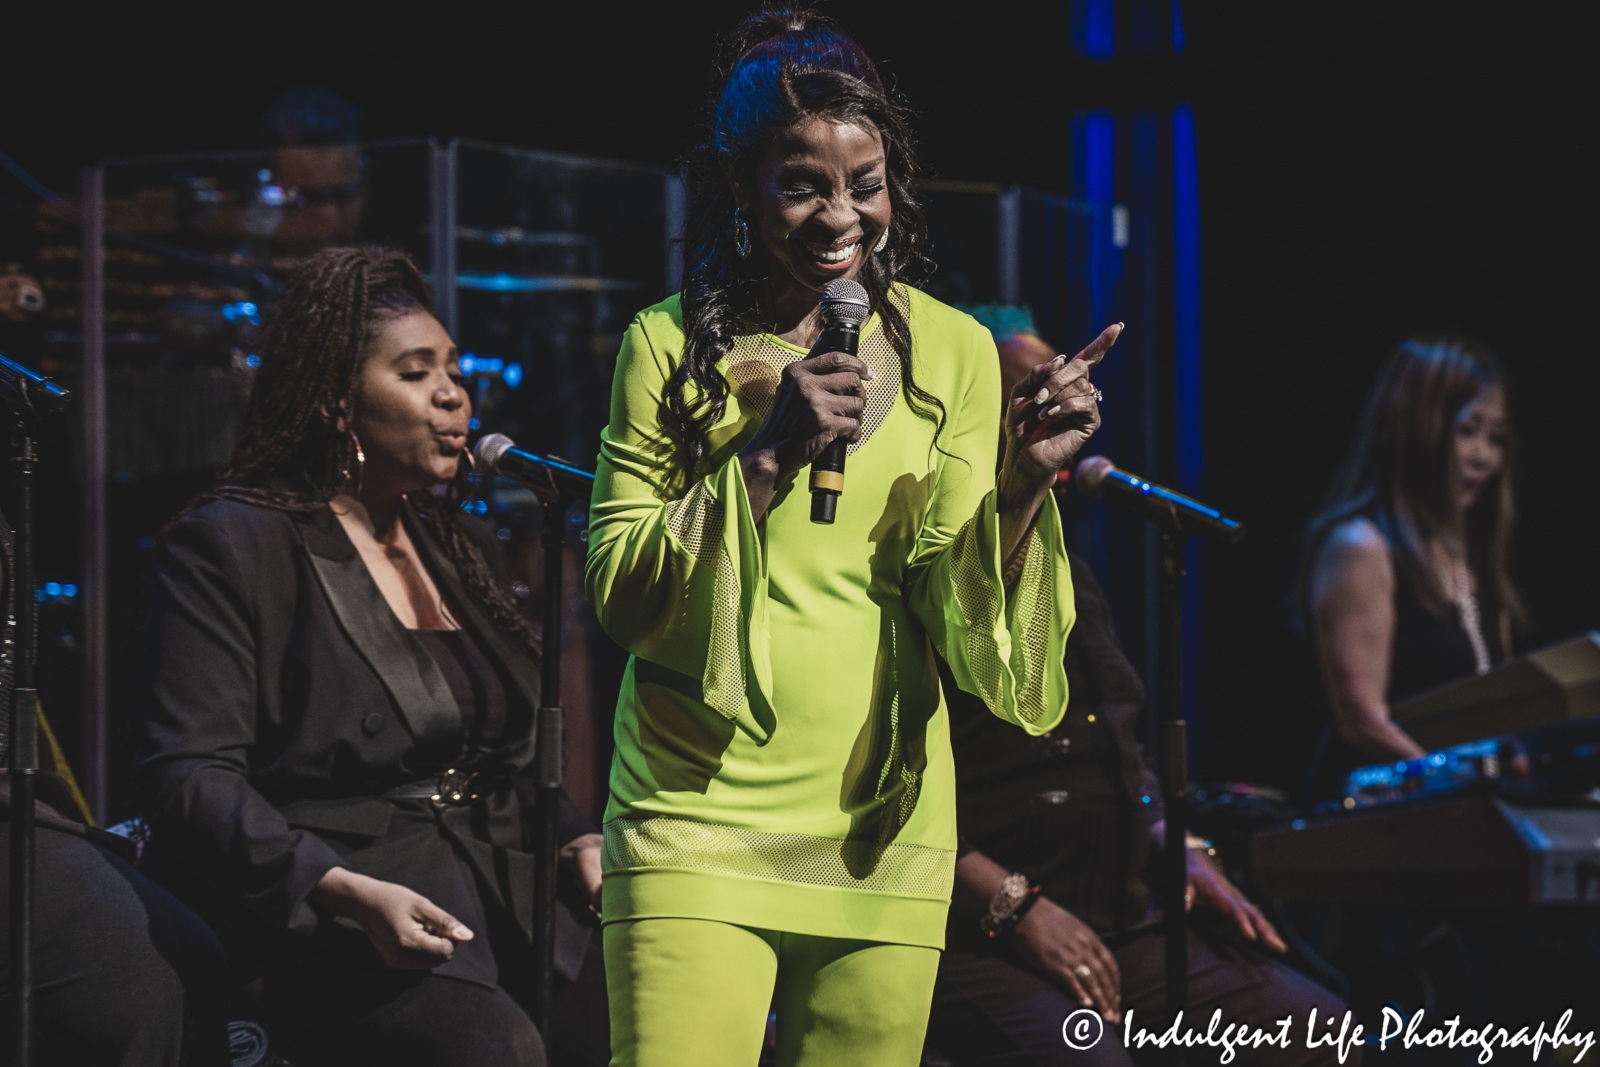 The "Empress of Soul" Gladys Knight performing "Taste of Bitter Love" (1980) at Kauffman Center in downtown Kansas City, MO on November 19, 2023.